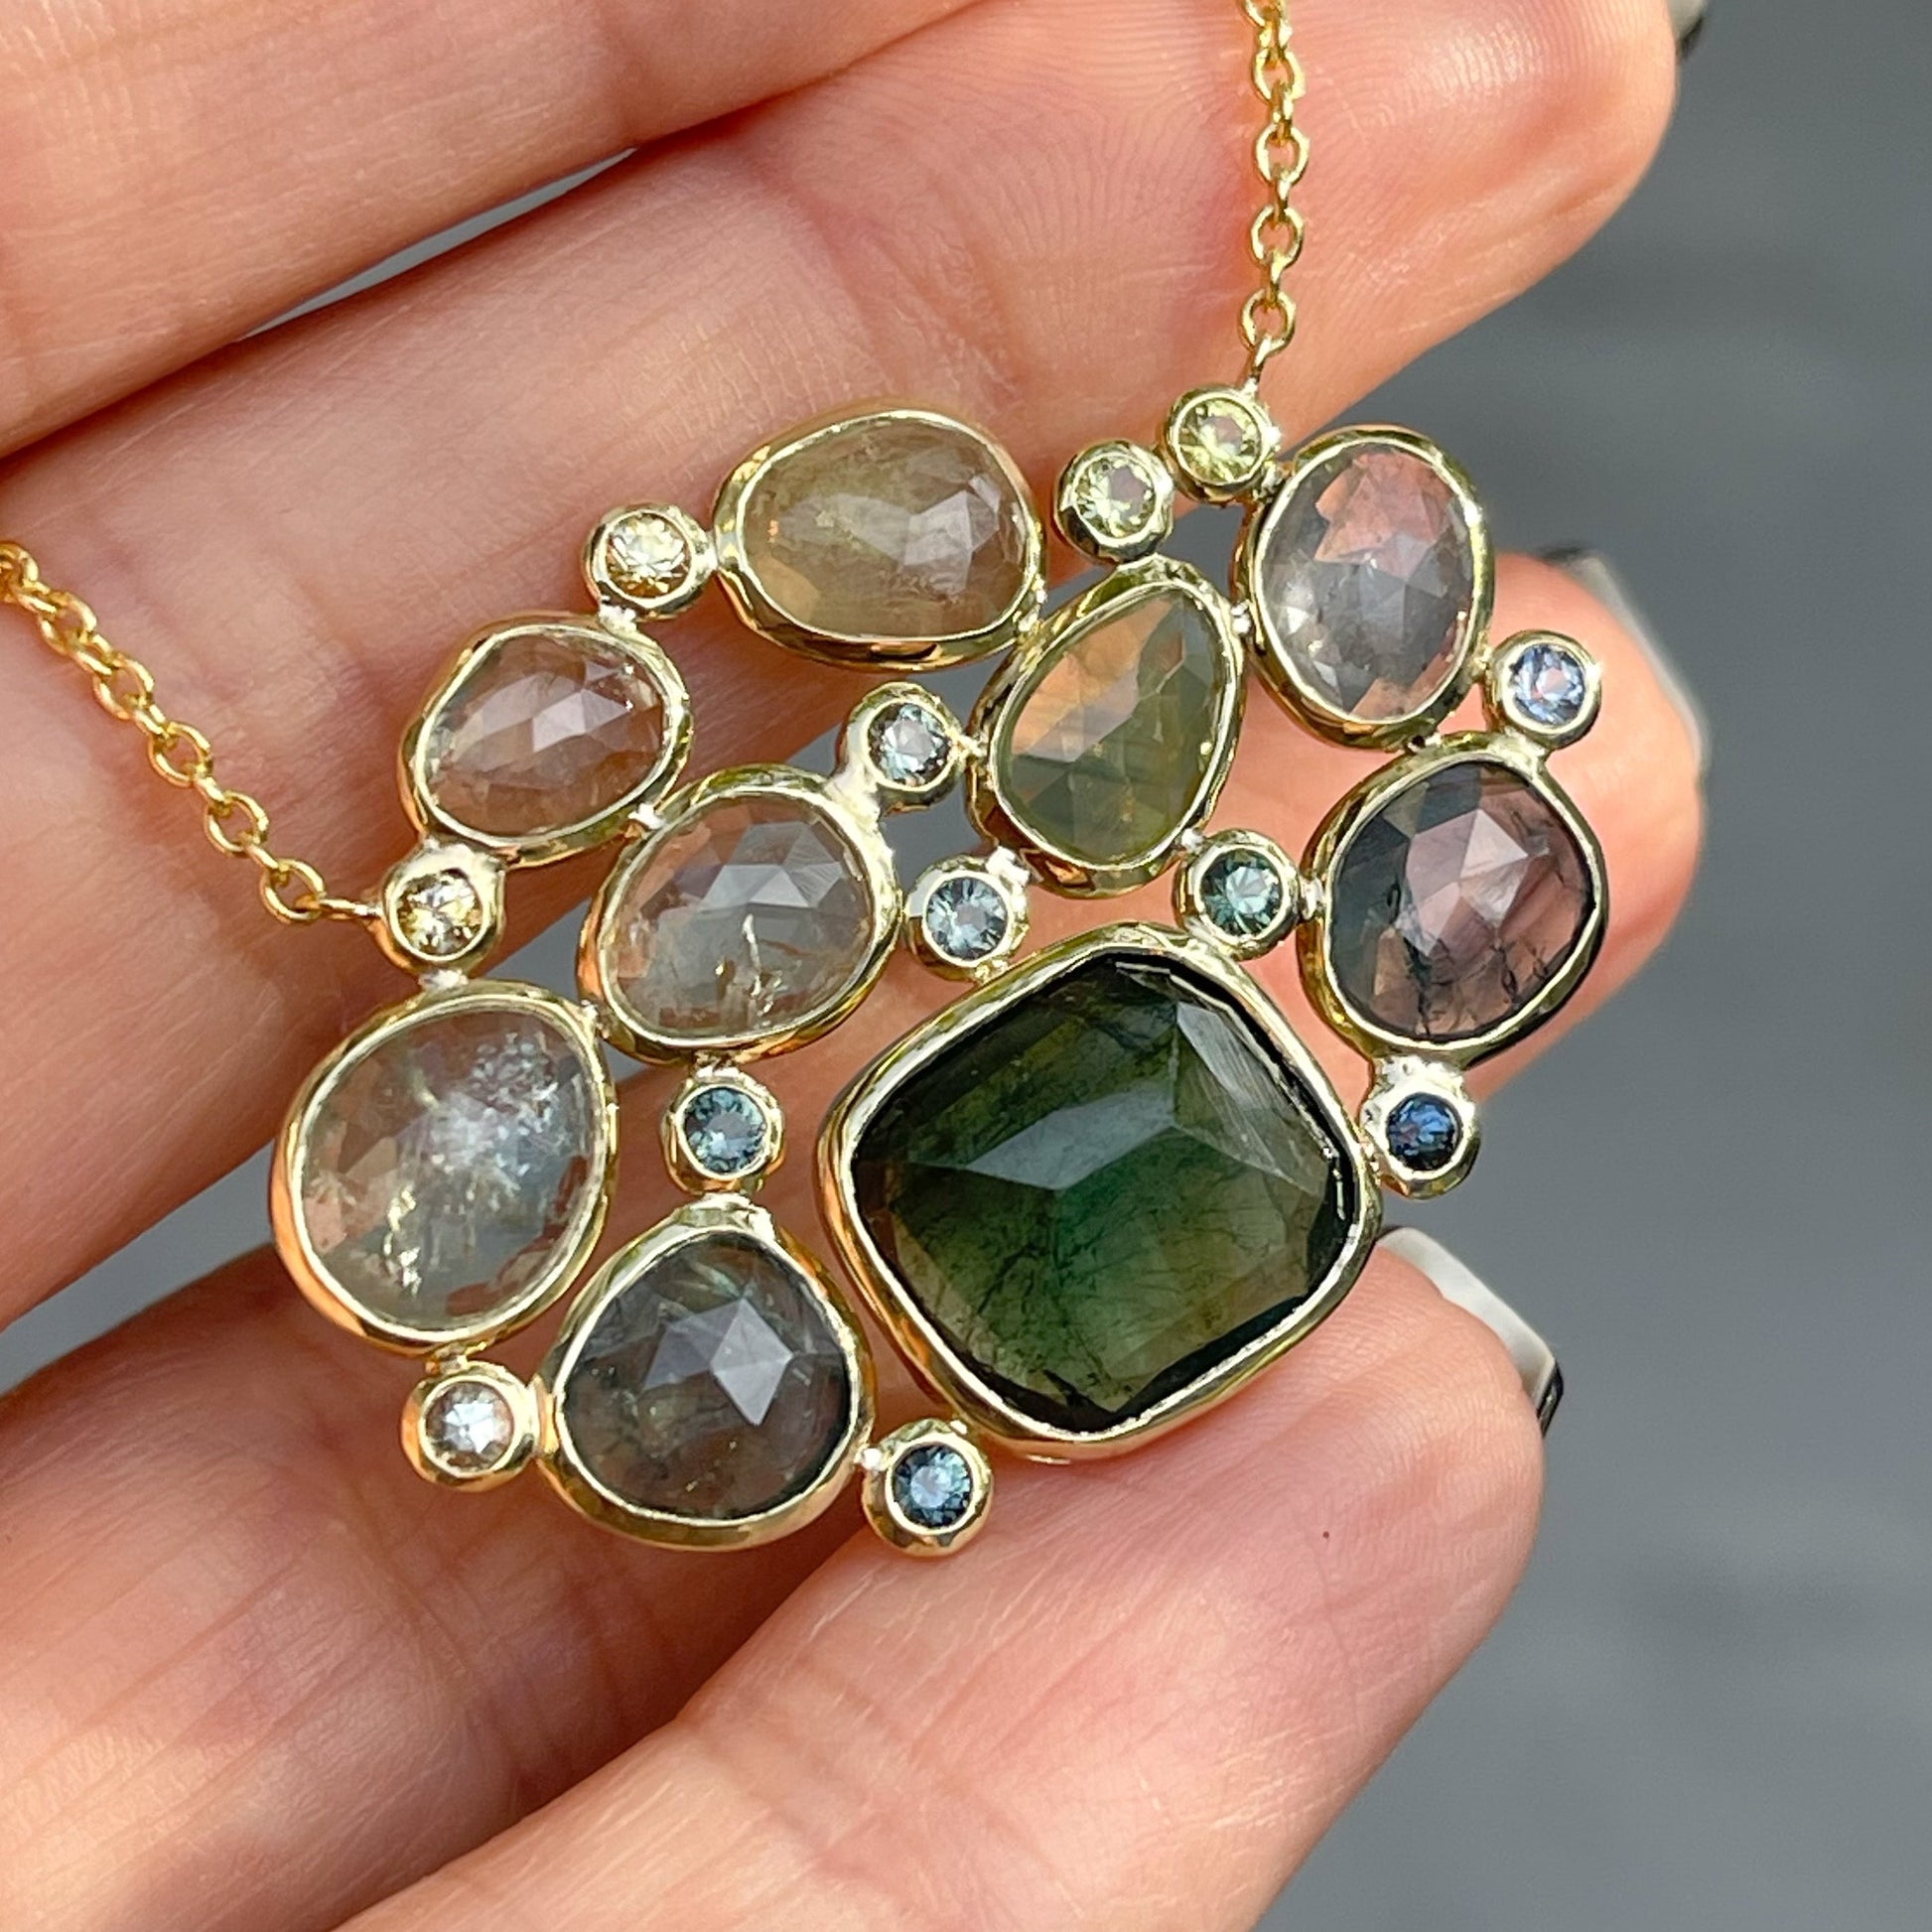  A Tourmaline and Sapphire Necklace by NIXIN Jewelry in 14k gold.